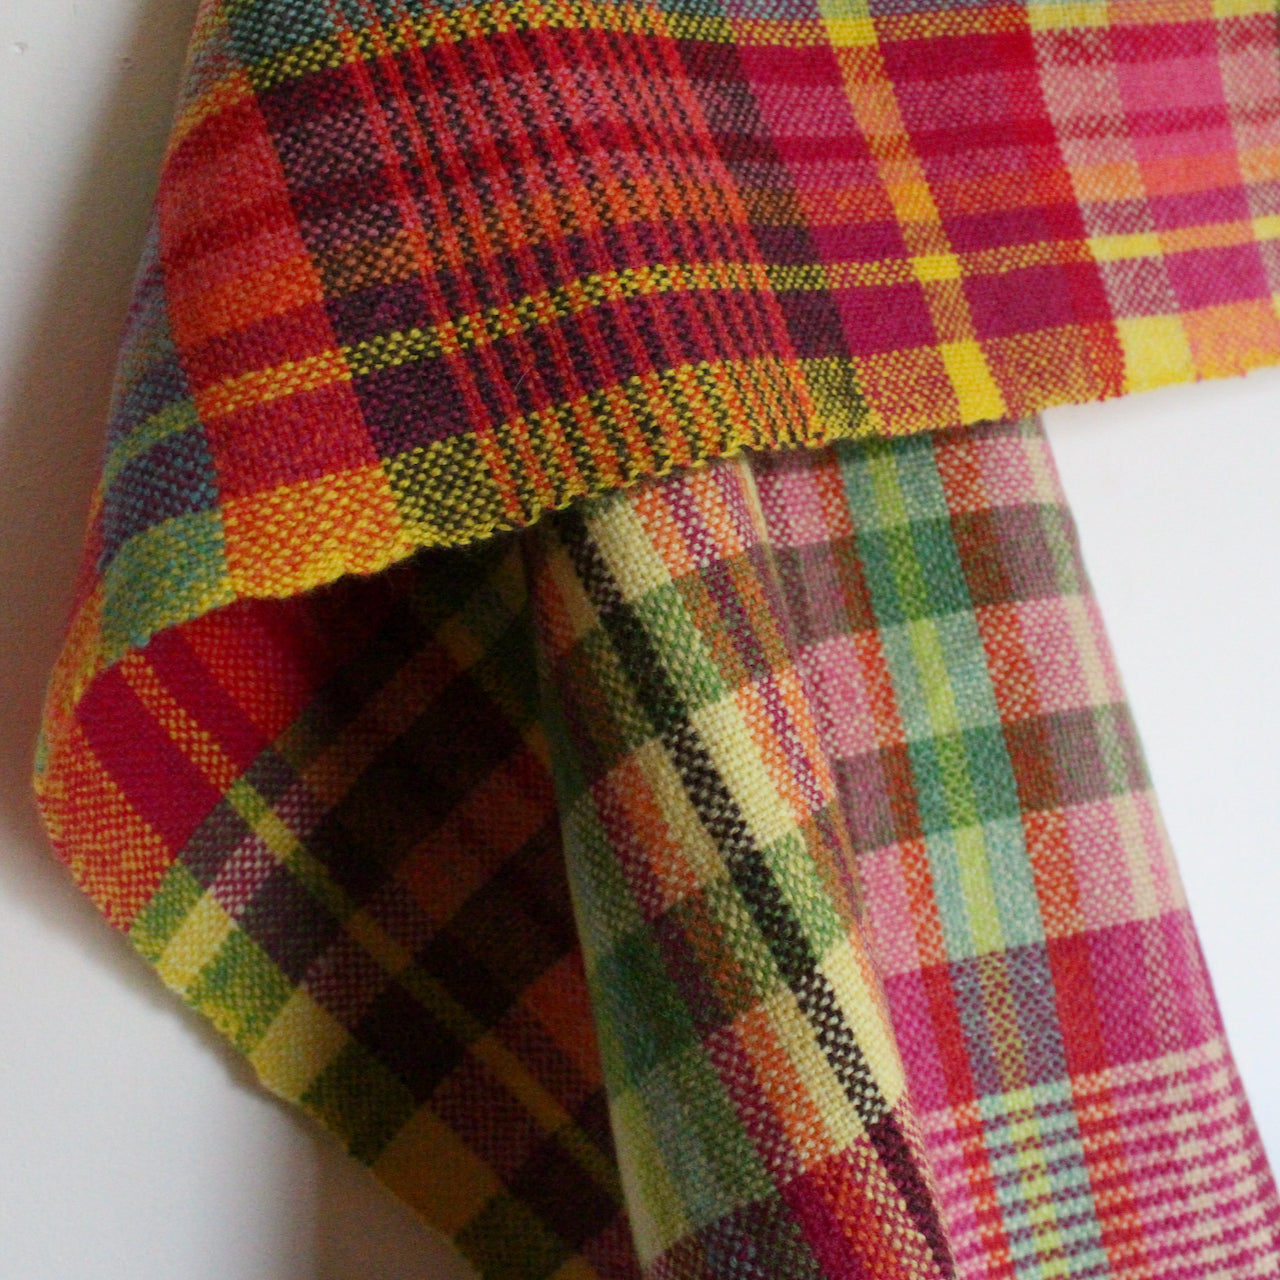 close up detail of a woollen hand-woven scarf in pinks, yellow and black by textile artist Teresa Dunne.